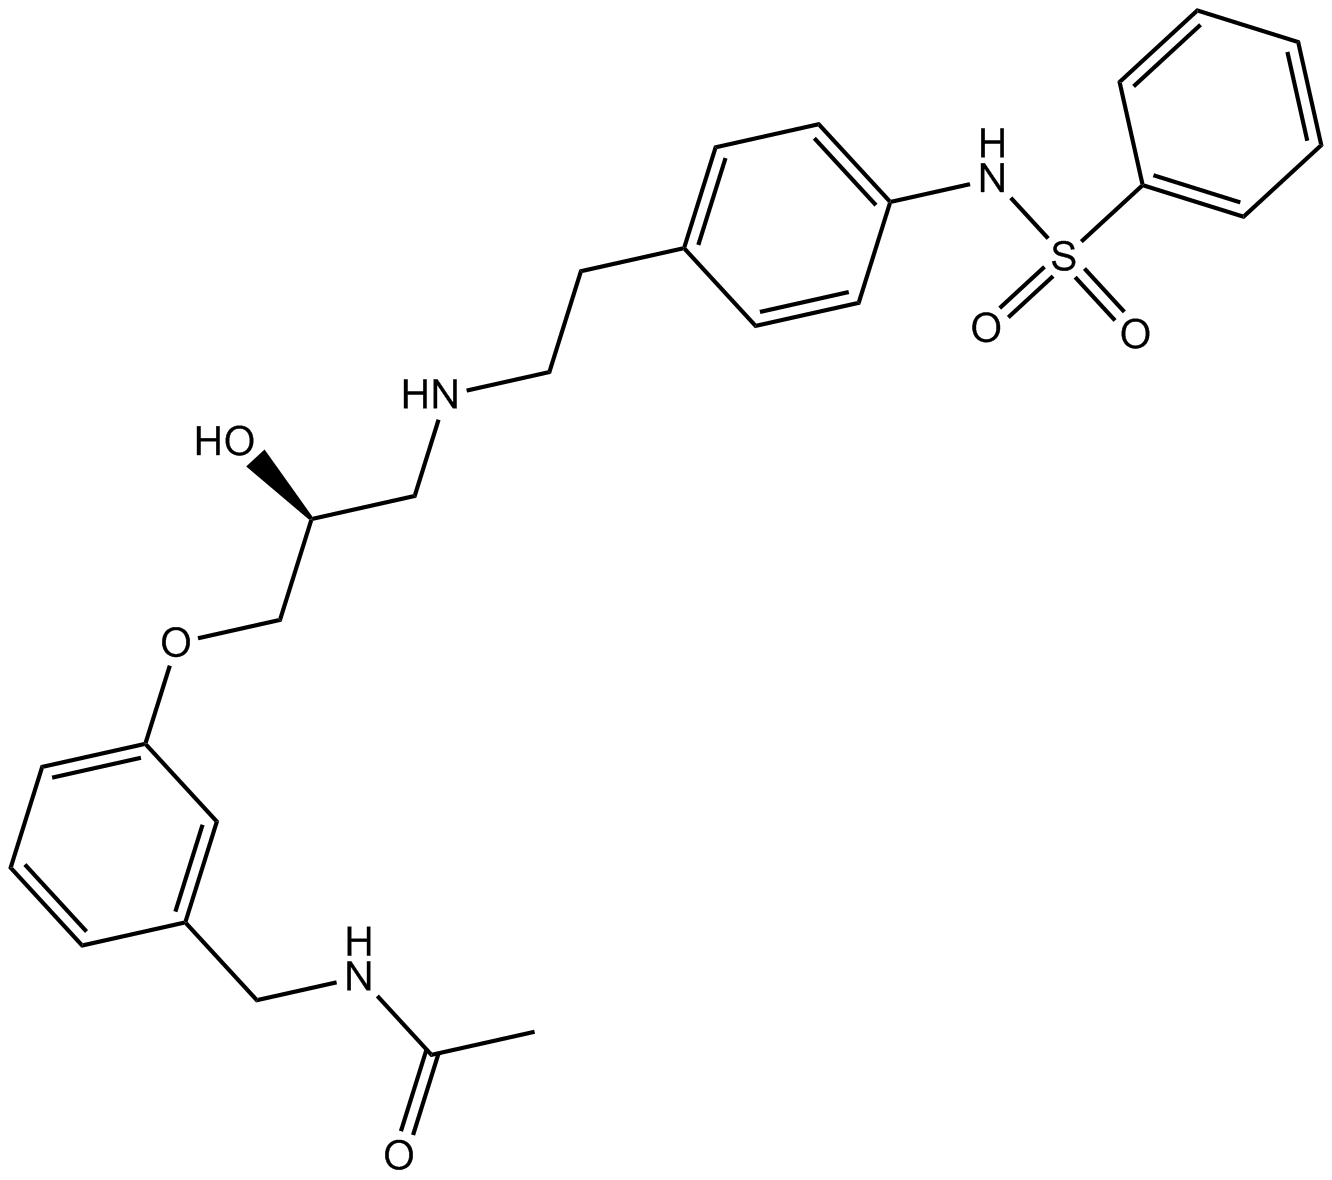 L-748,337  Chemical Structure